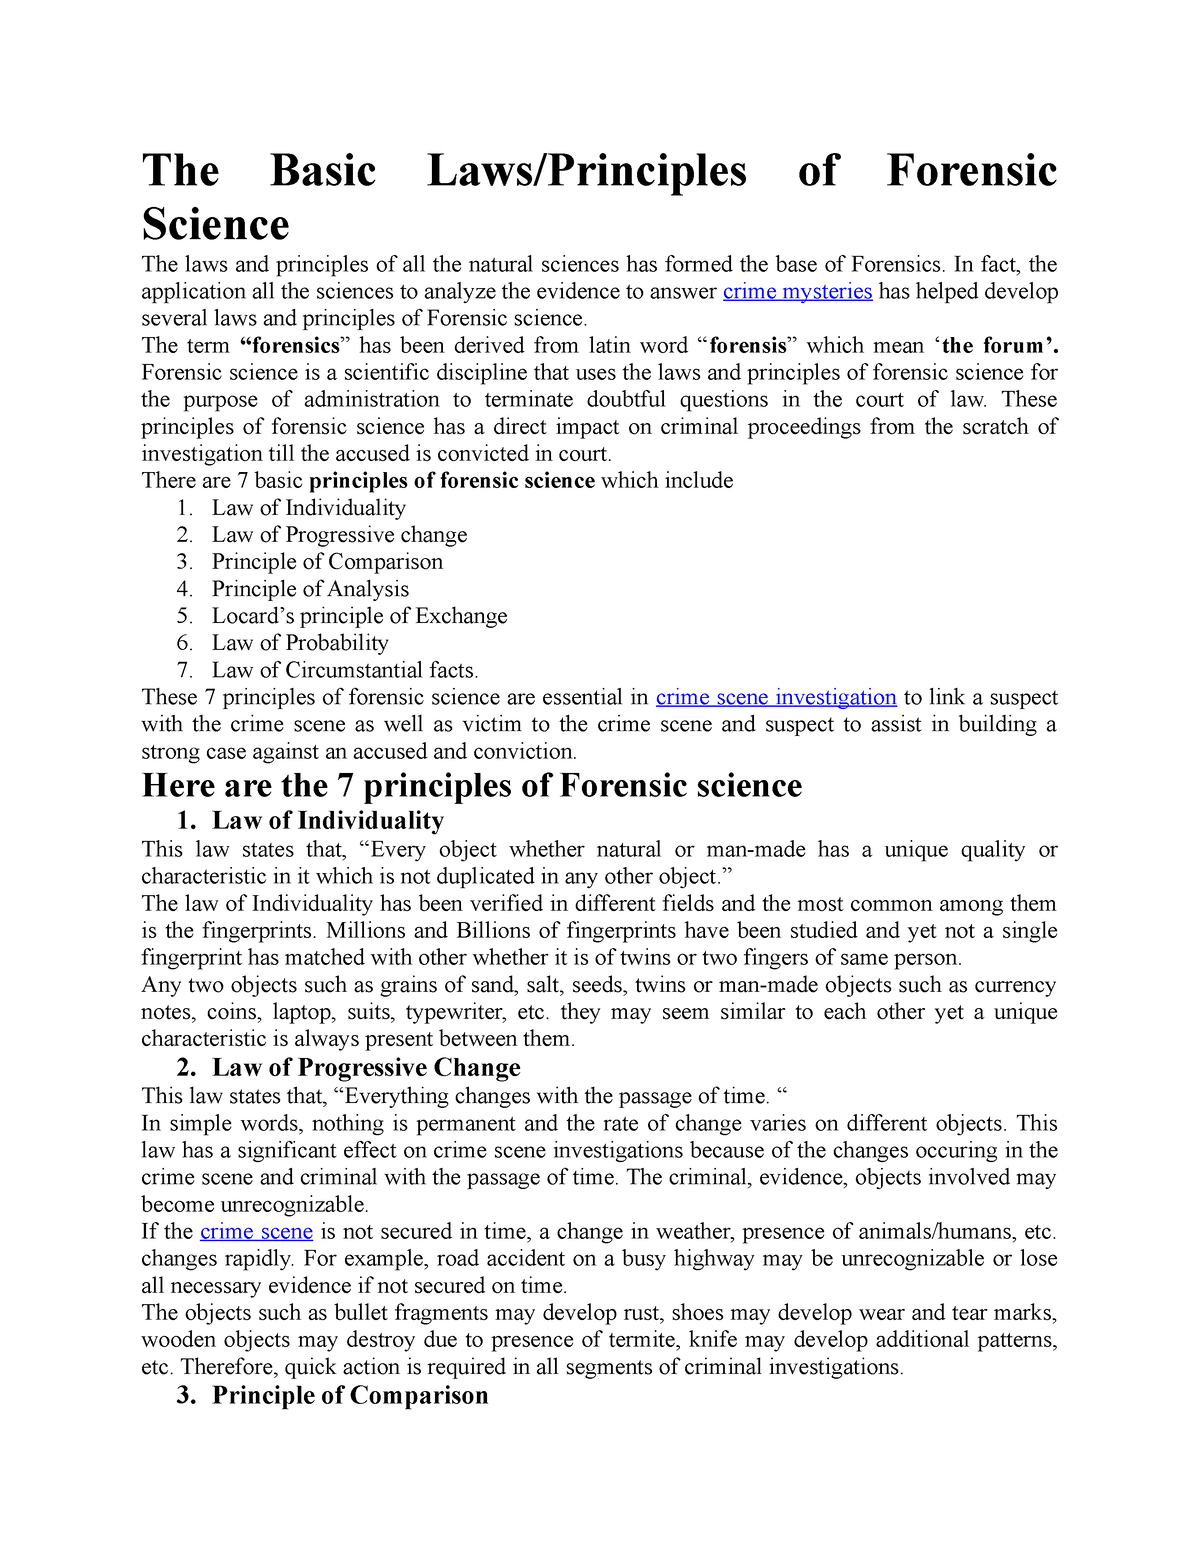 Basic Laws Of Forensic Science The Basic Lawsprinciples Of Forensic Science The Laws And 